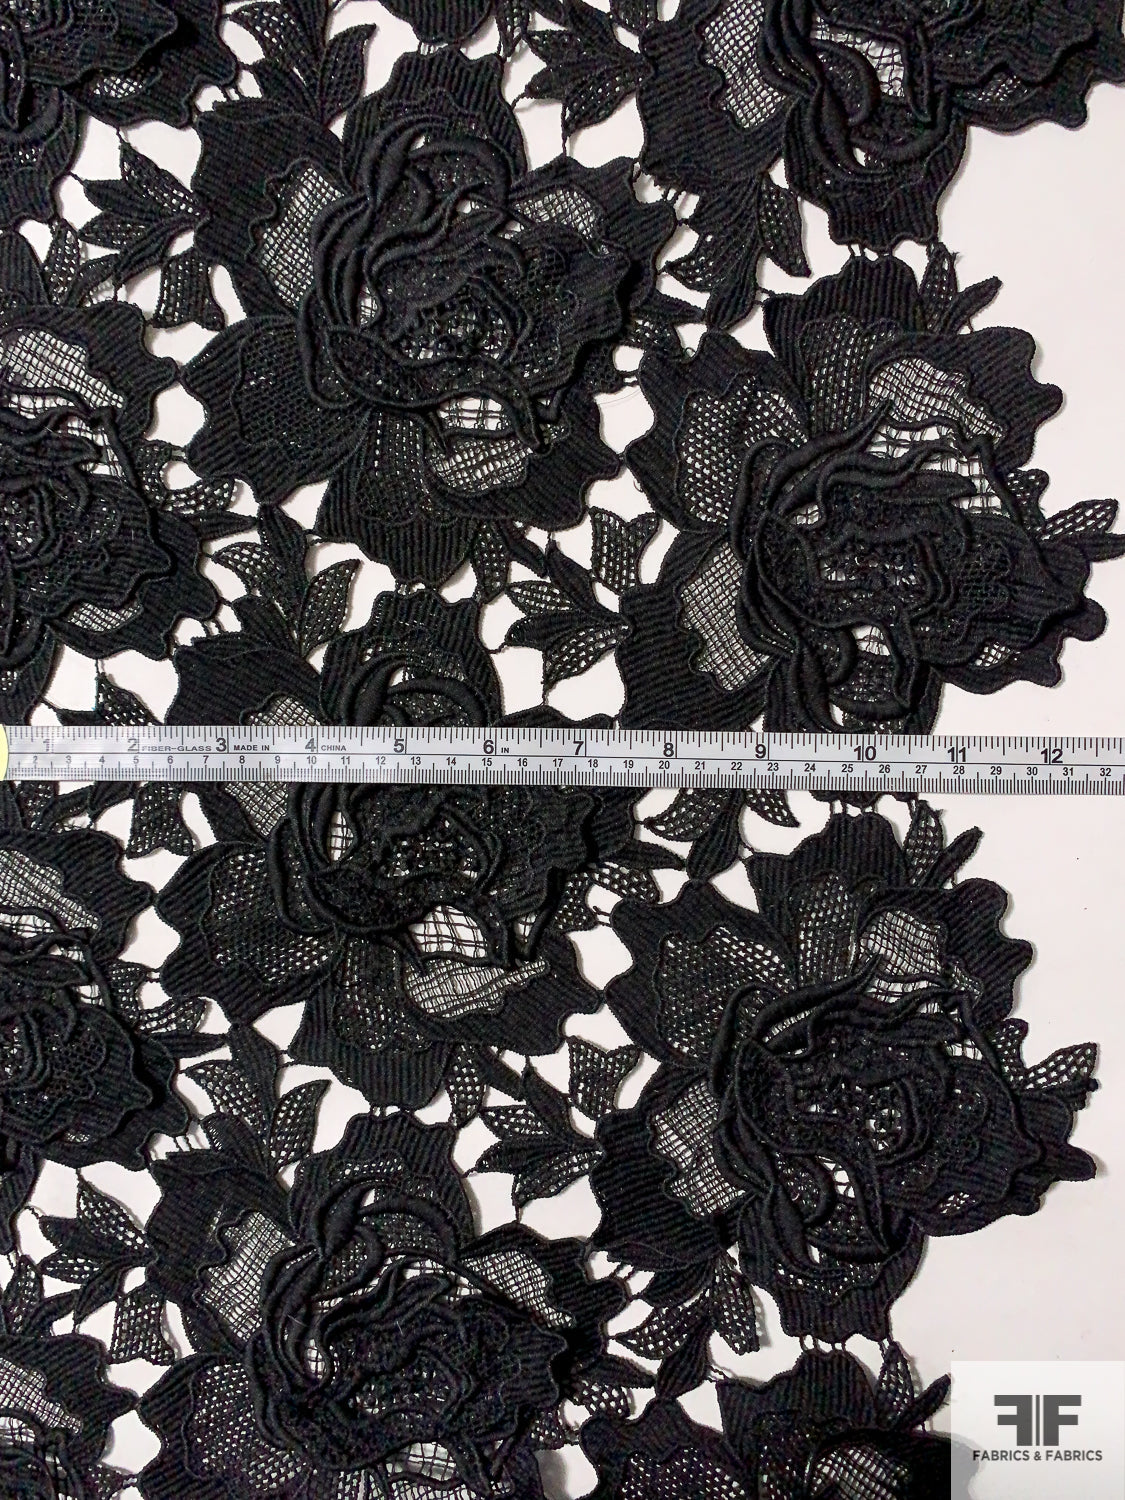 Floral Guipure Lace - Black  Lace wallpaper, Lace drawing, Fabric